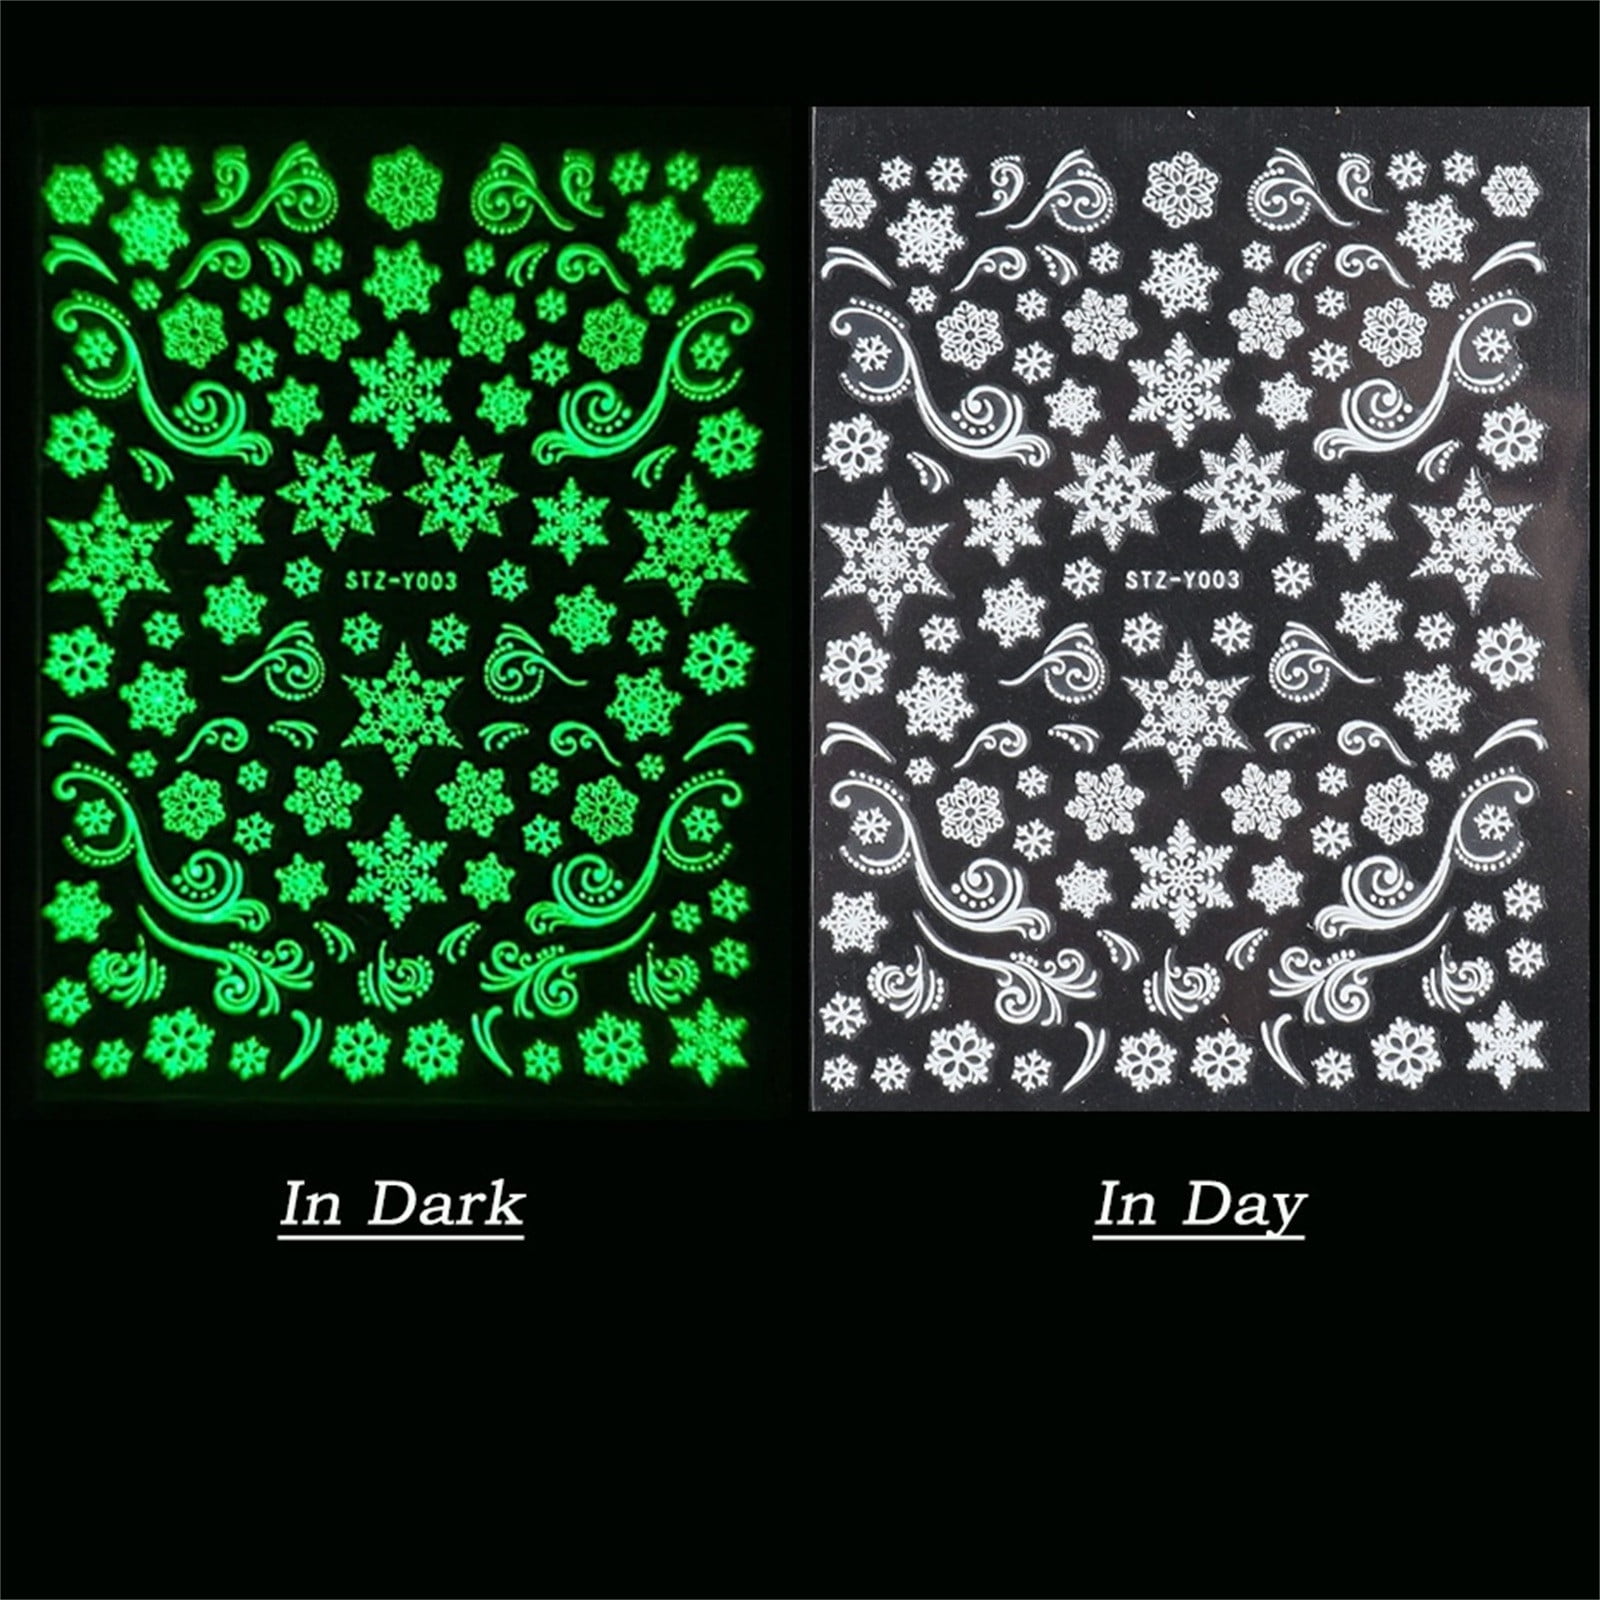 3D Effect Christmas Foiled Snowflake Window Stickers 